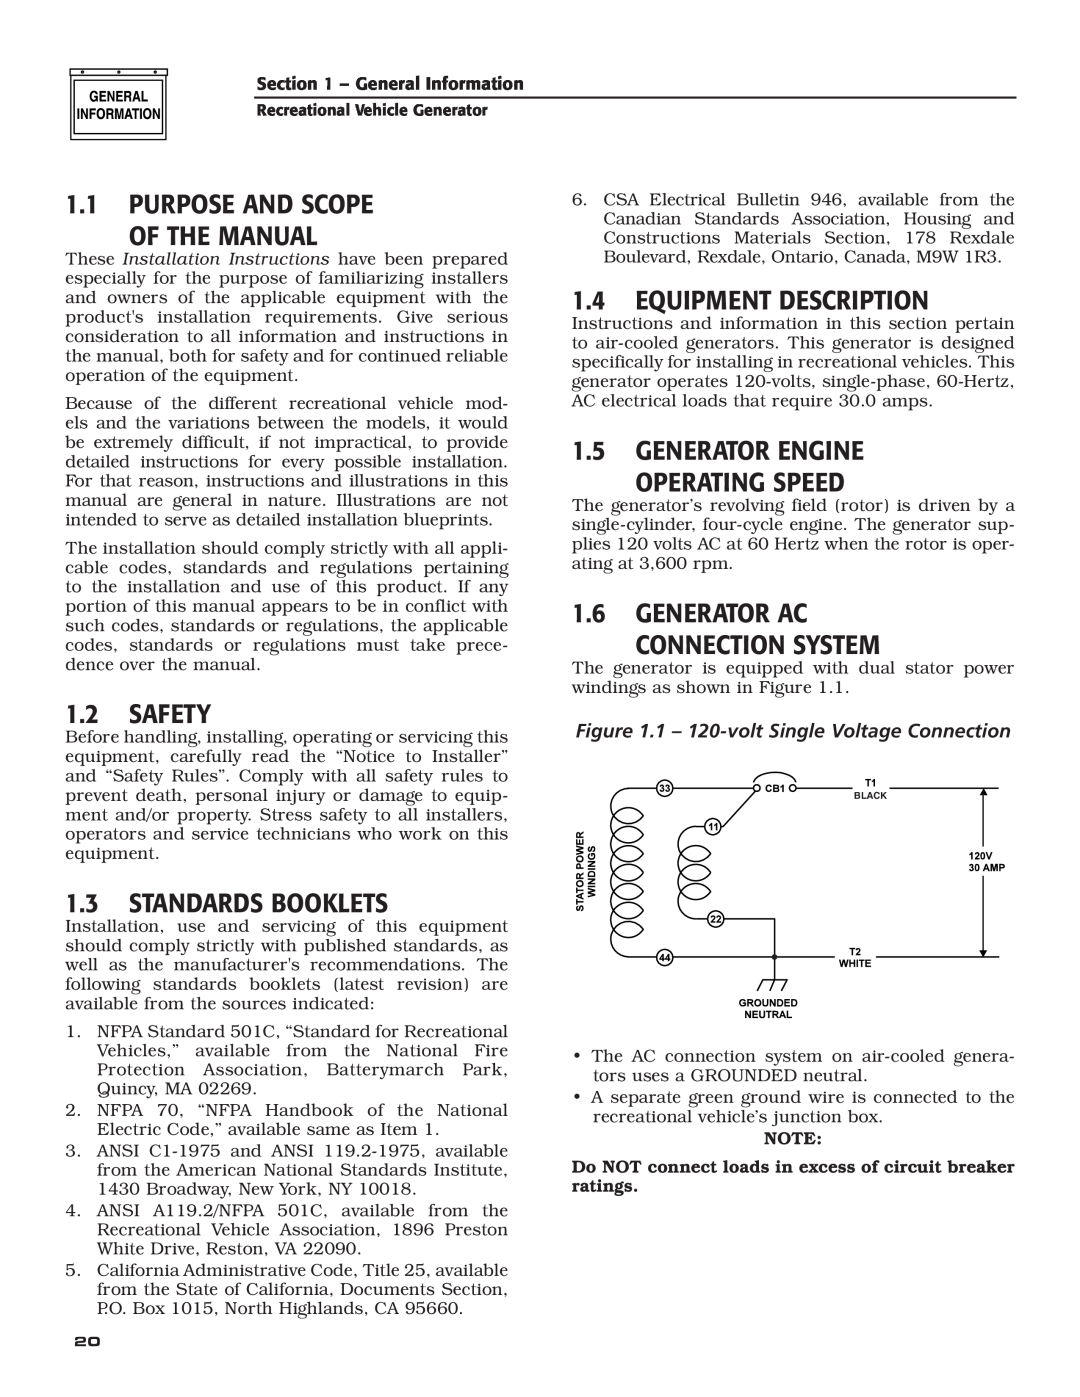 Generac Power Systems 004700-00 Purpose And Scope Of The Manual, Equipment Description, Generator Engine Operating Speed 